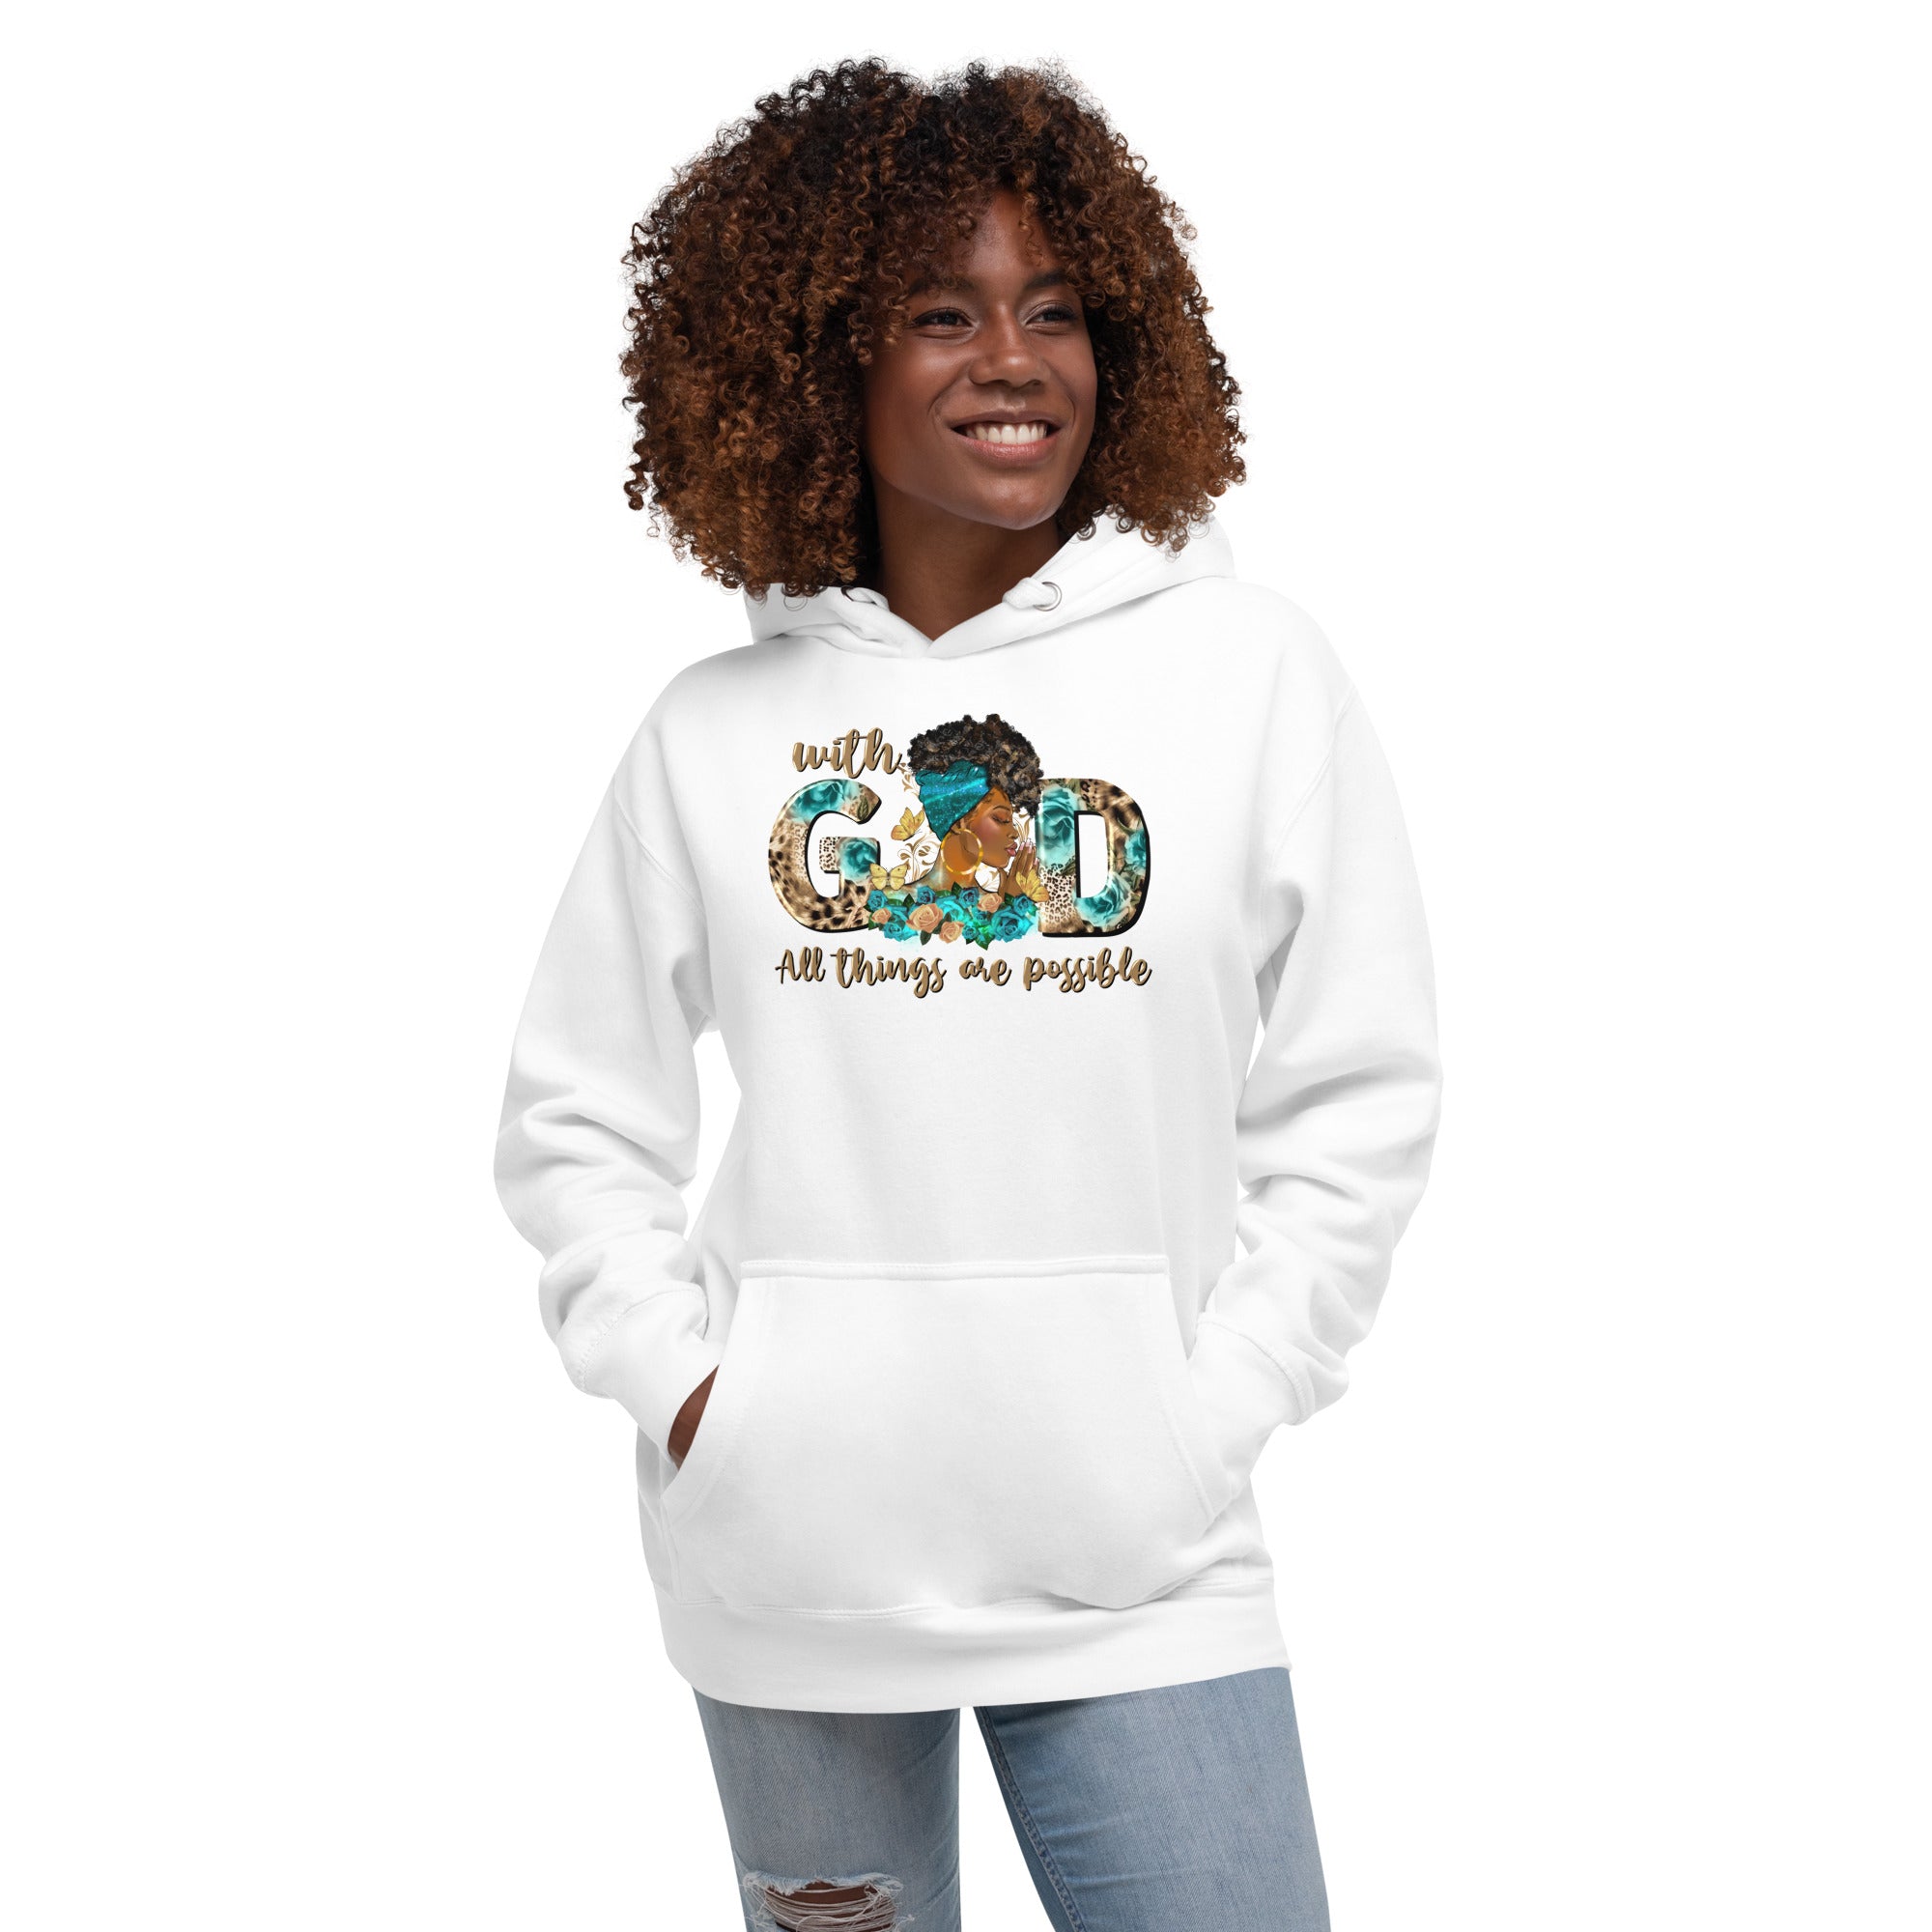 Women's graphic Hoodie "With God all things are possible"